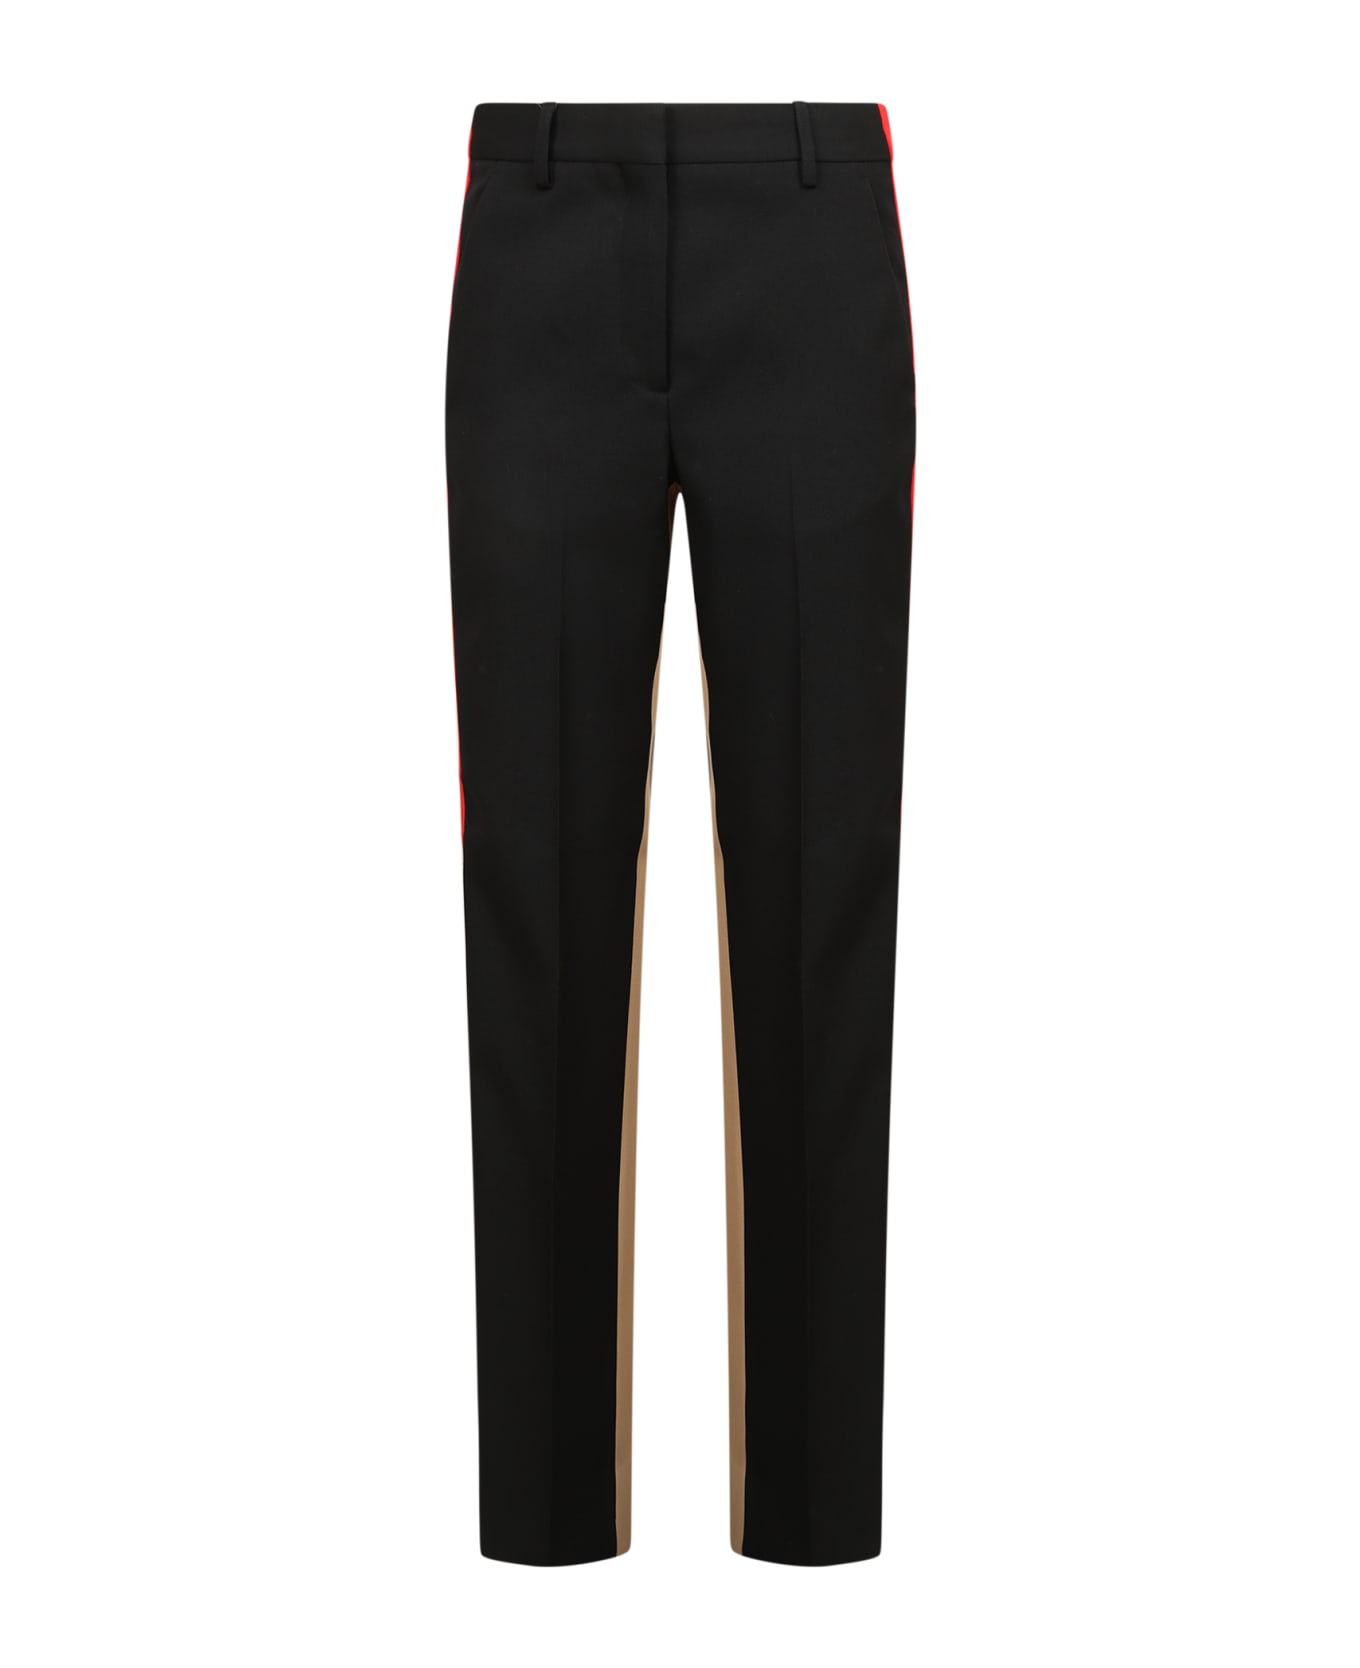 Burberry Wool Trousers - Black ボトムス